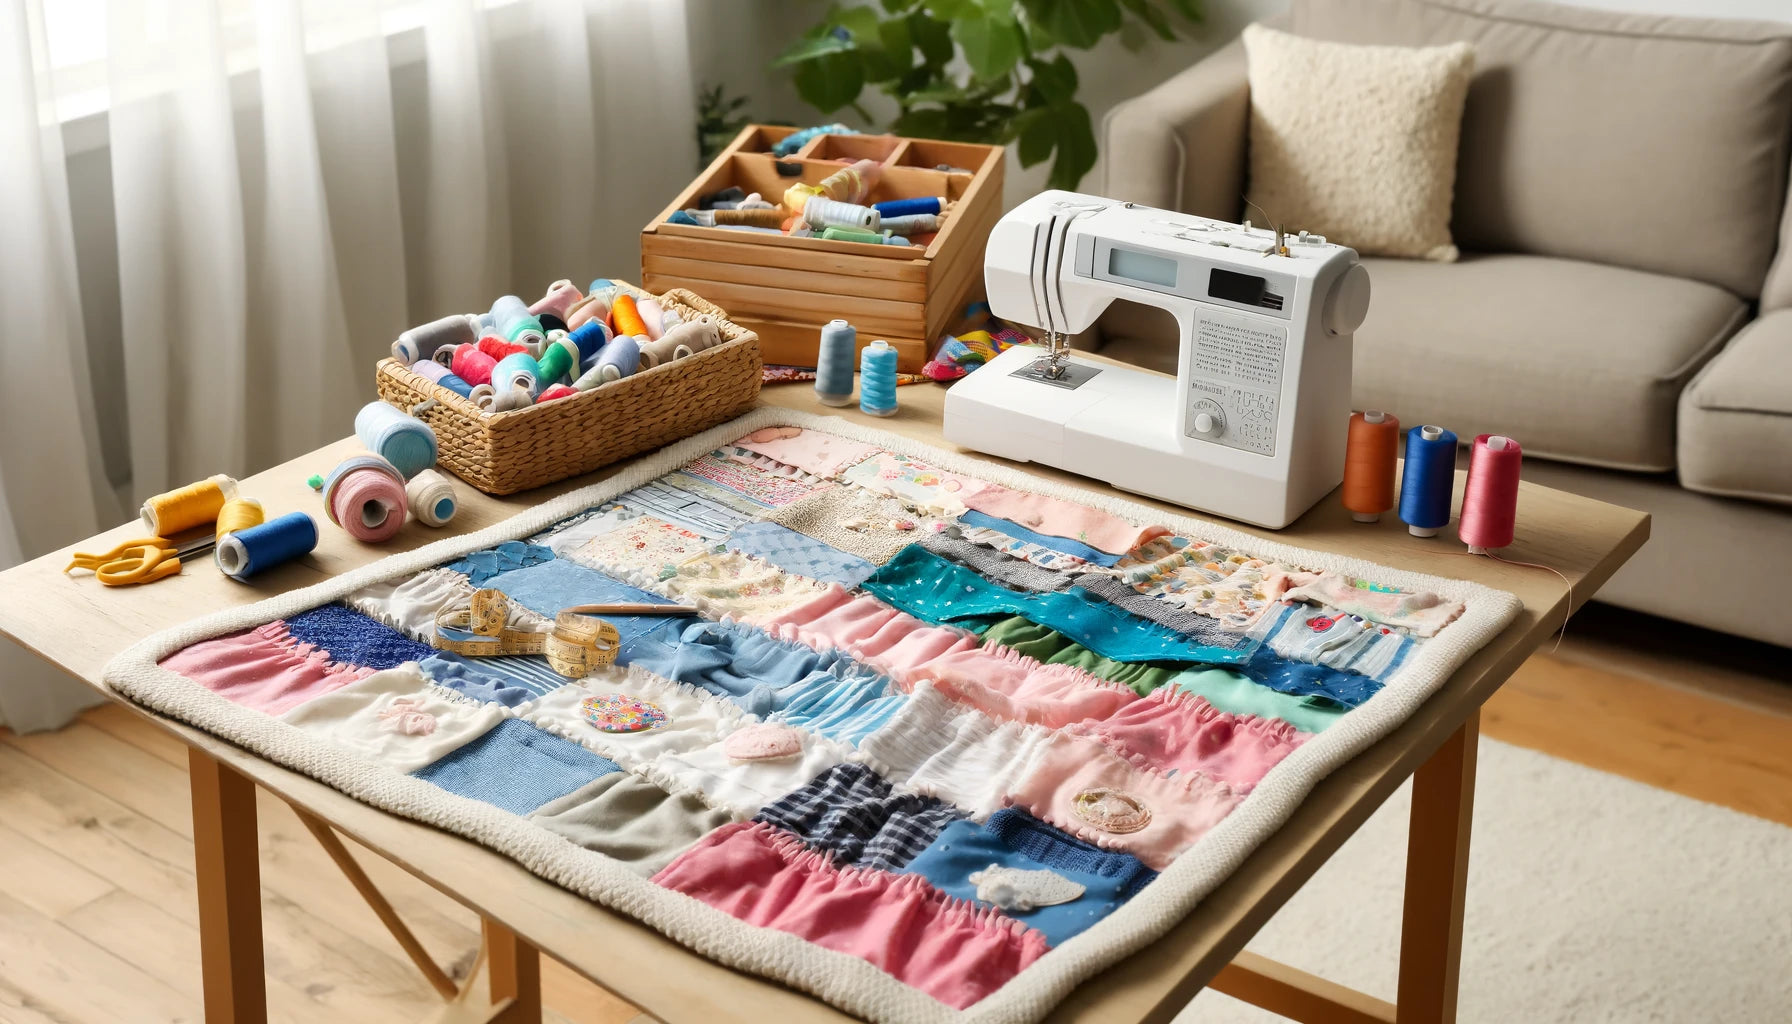 How to Make a Blanket Out of Baby Clothes: A Sentimental DIY Project